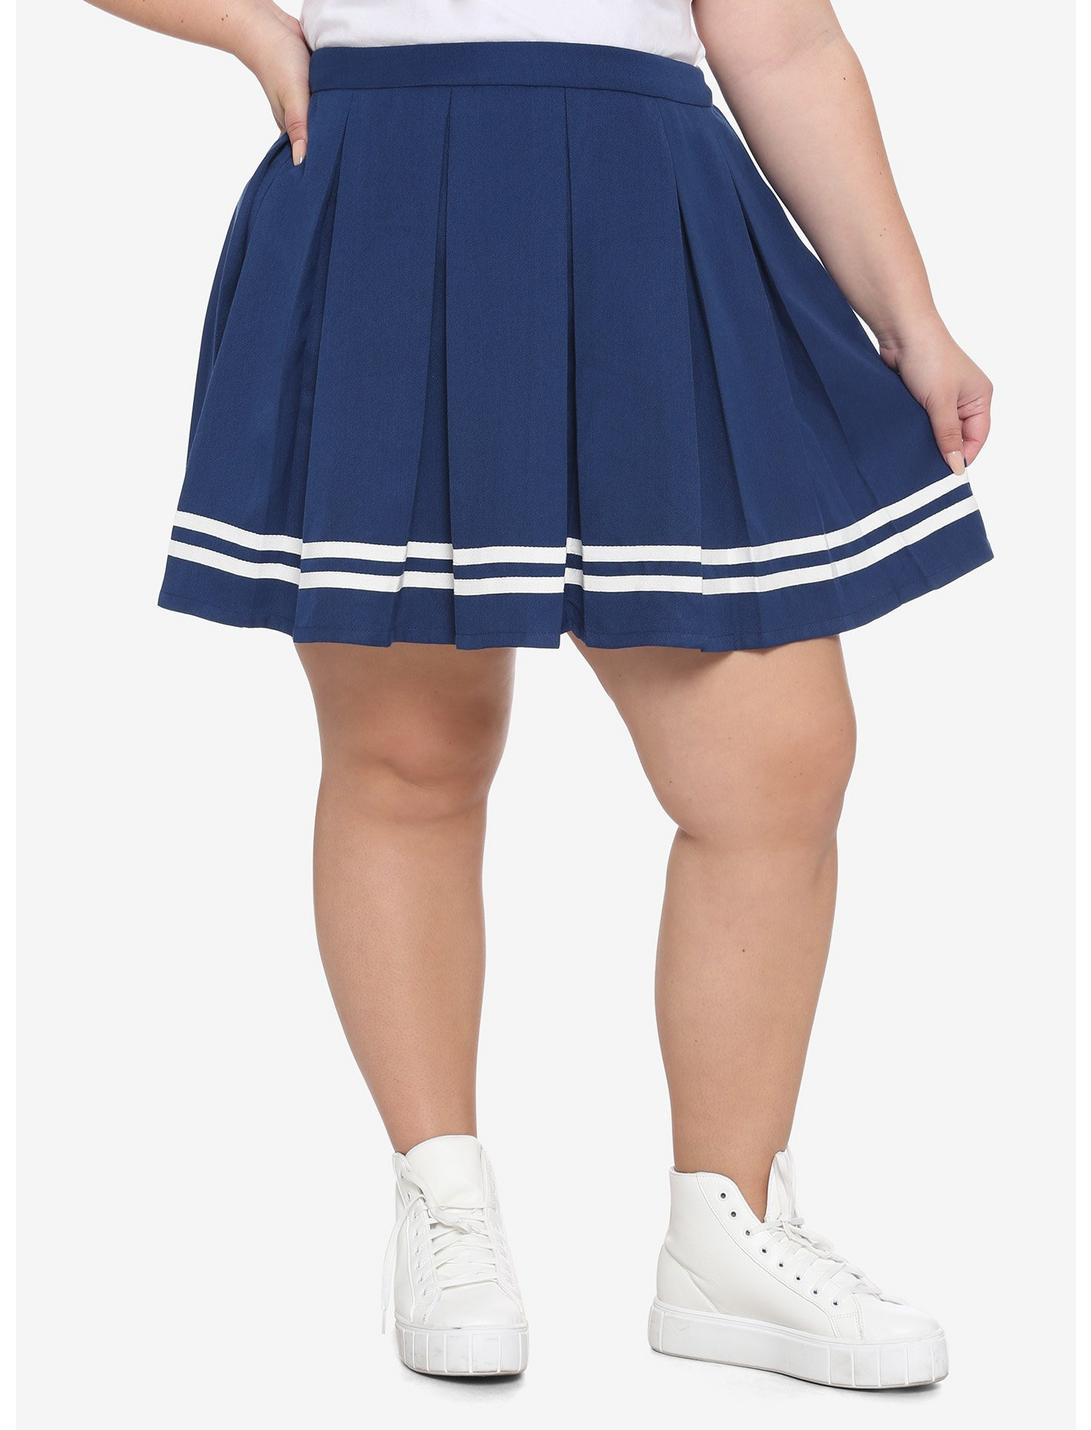 Navy Pleated Cheer Skirt Plus Size, NAVY, hi-res